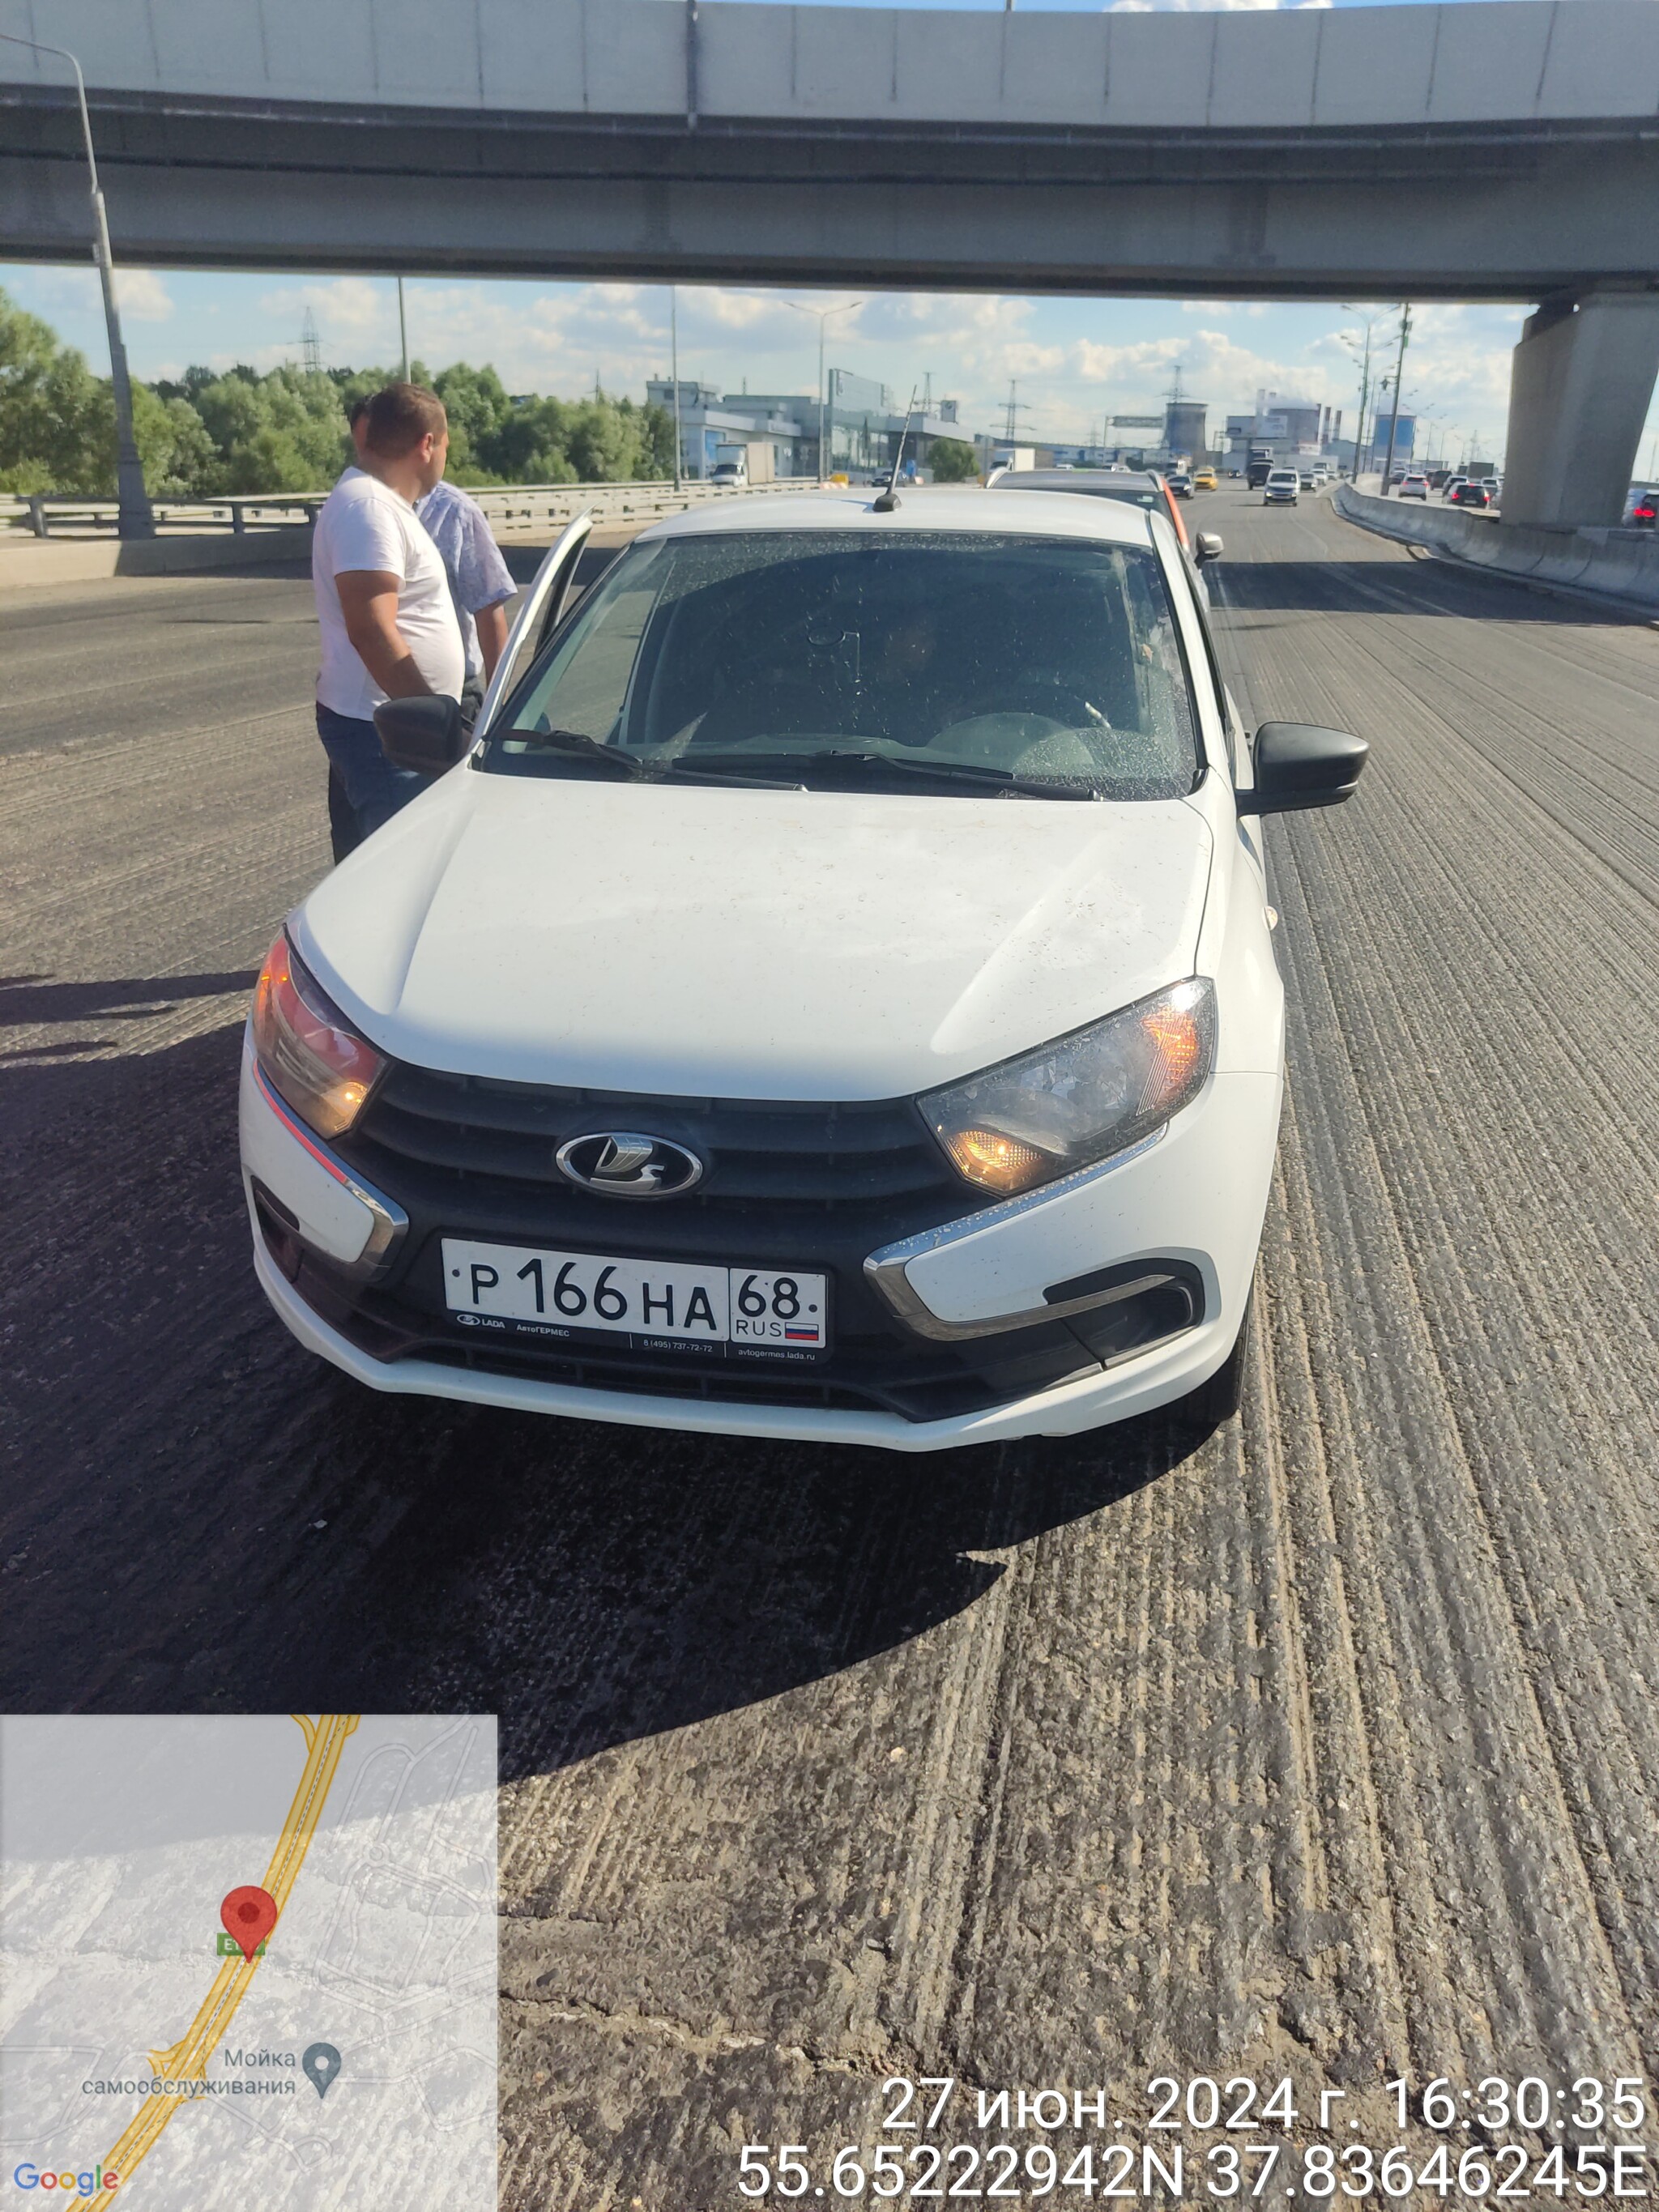 Post #11568623 - My, Road, Road accident, Help, Need advice, Moscow, Longpost